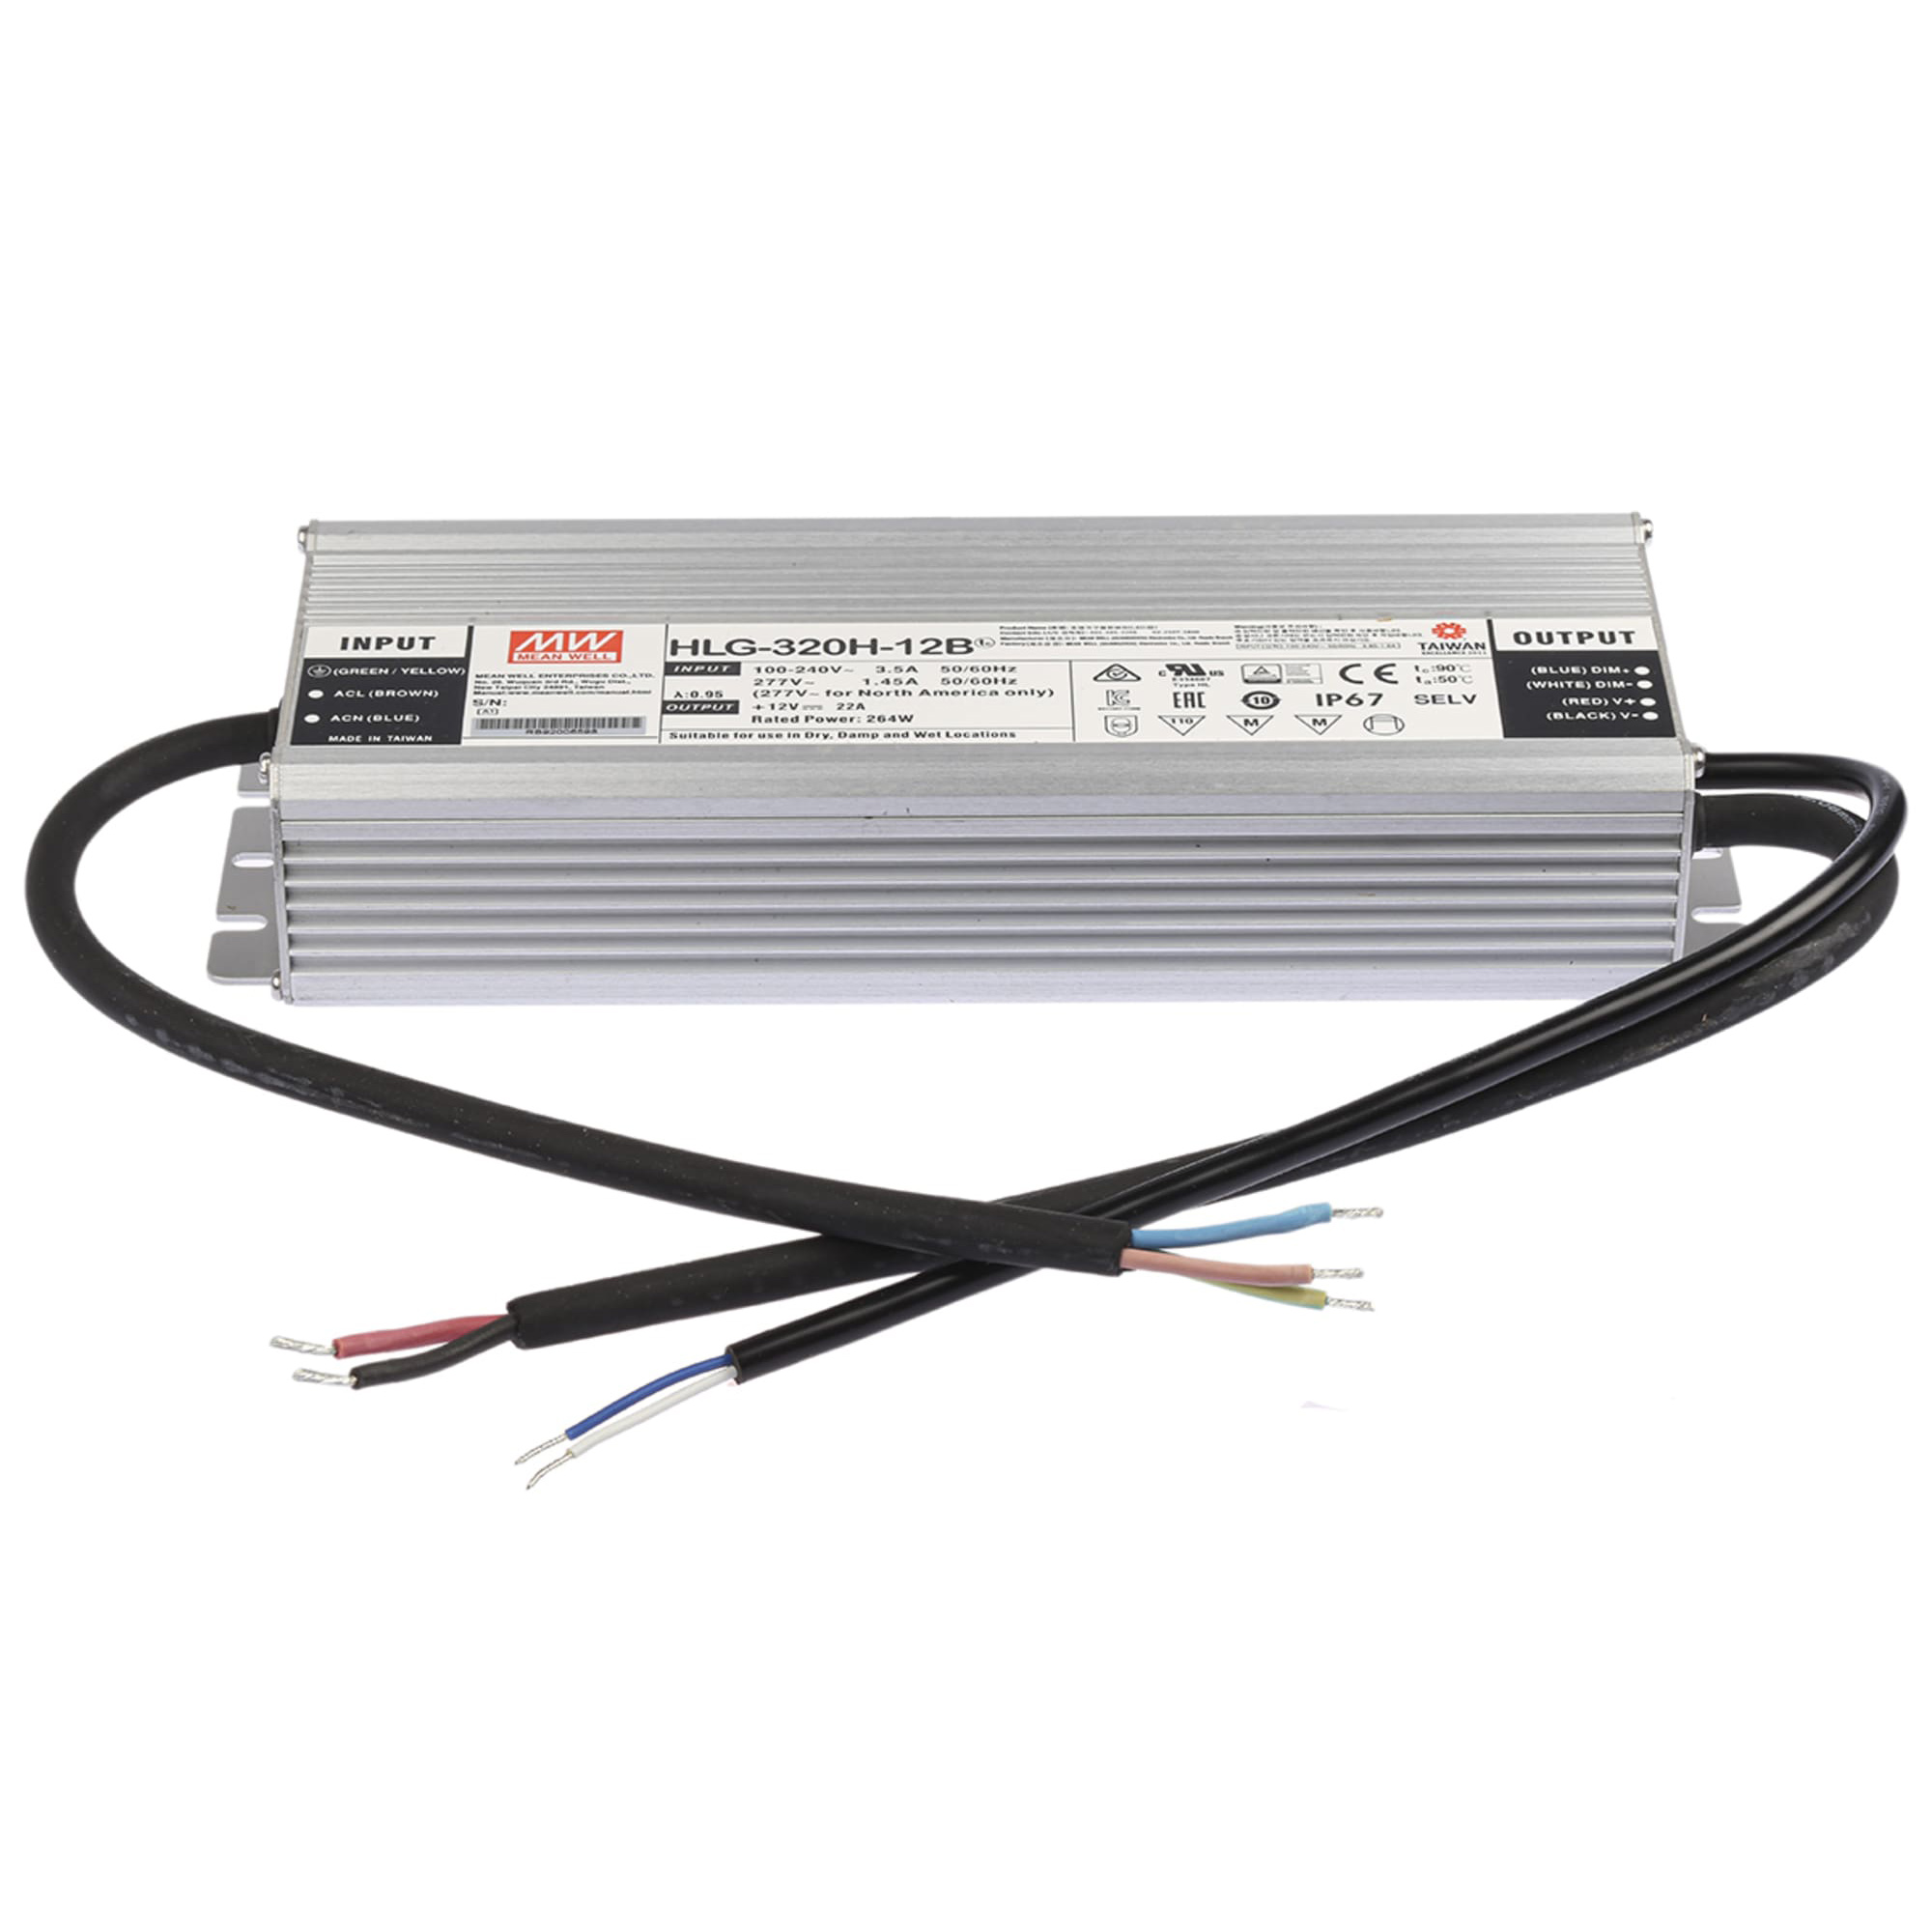 HLG-320H-12B 320W UL Listed 12V Power Supply - Meanwell Power Supply - IP67 Waterproof